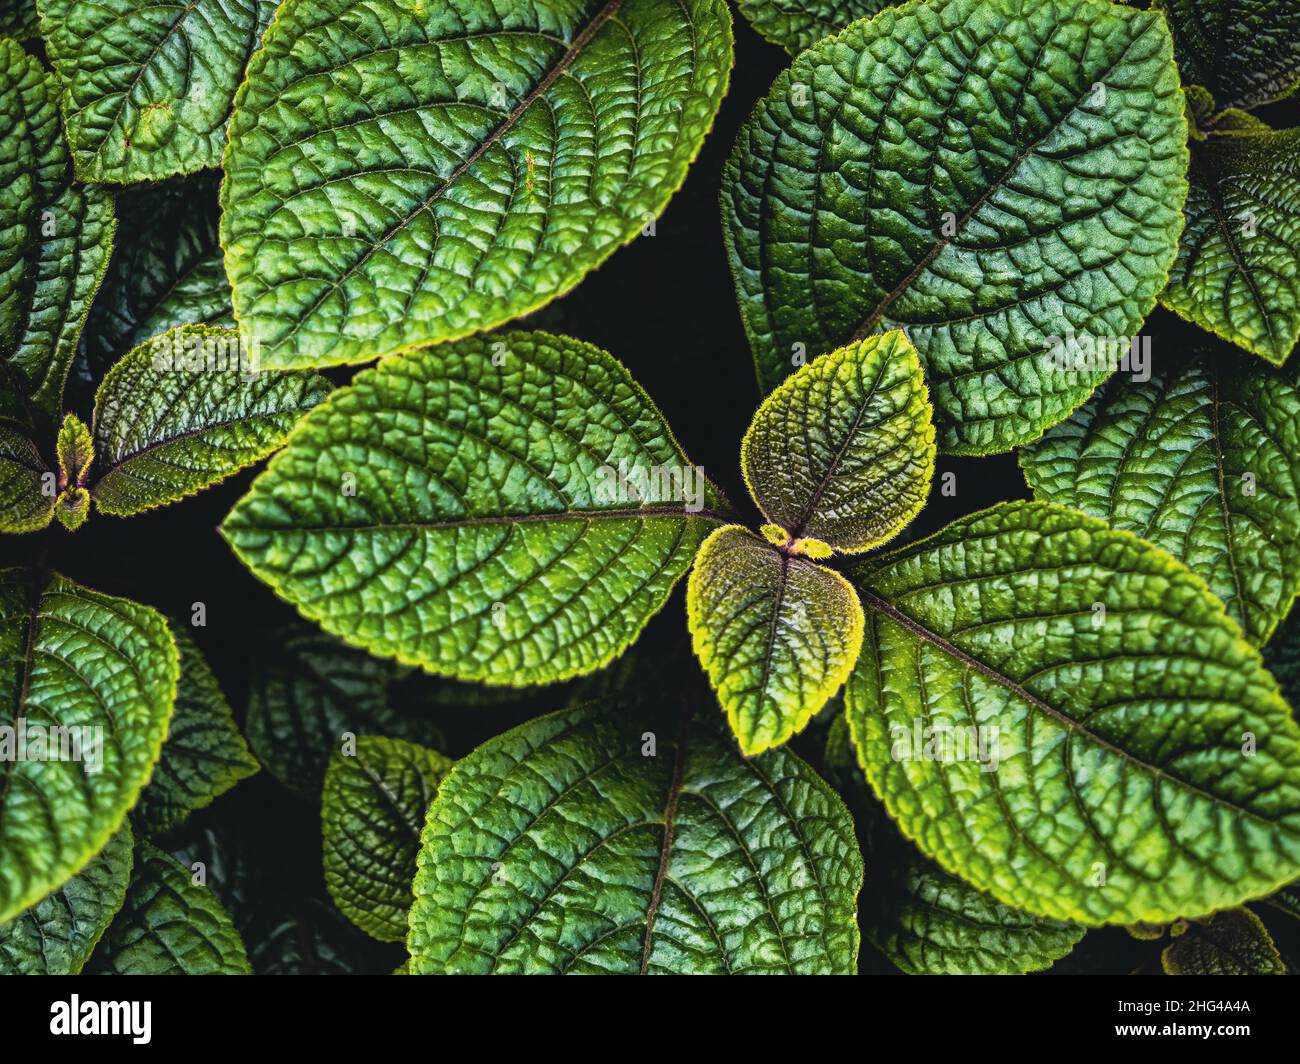 green textured leaves of pilea mollis or moon valley plant, natural background close up photo Stock Photo